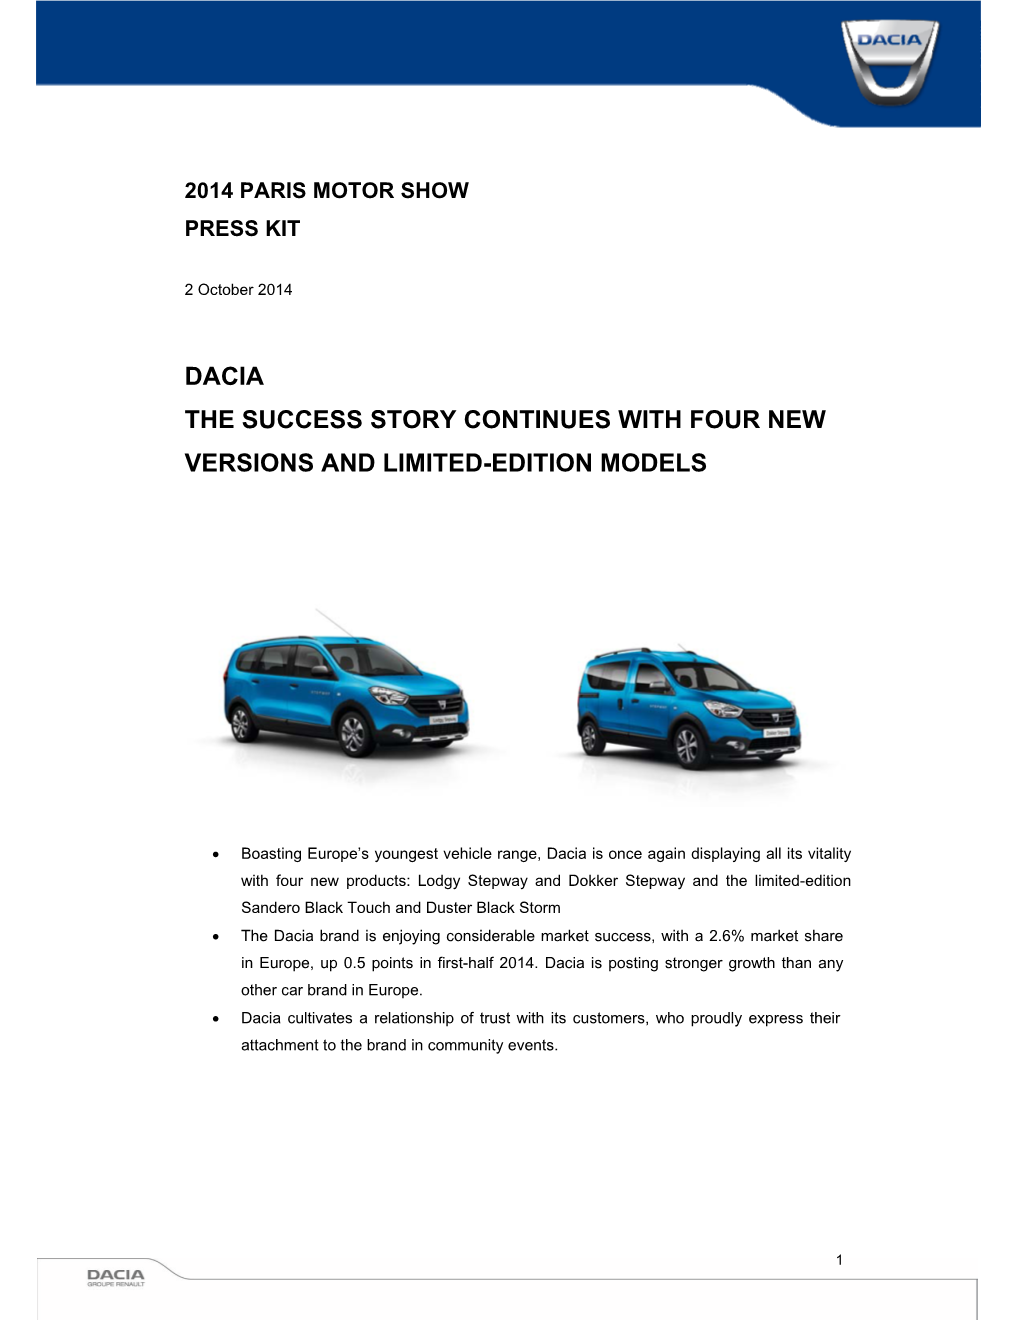 Dacia the Success Story Continues with Four New Versions and Limited-Edition Models